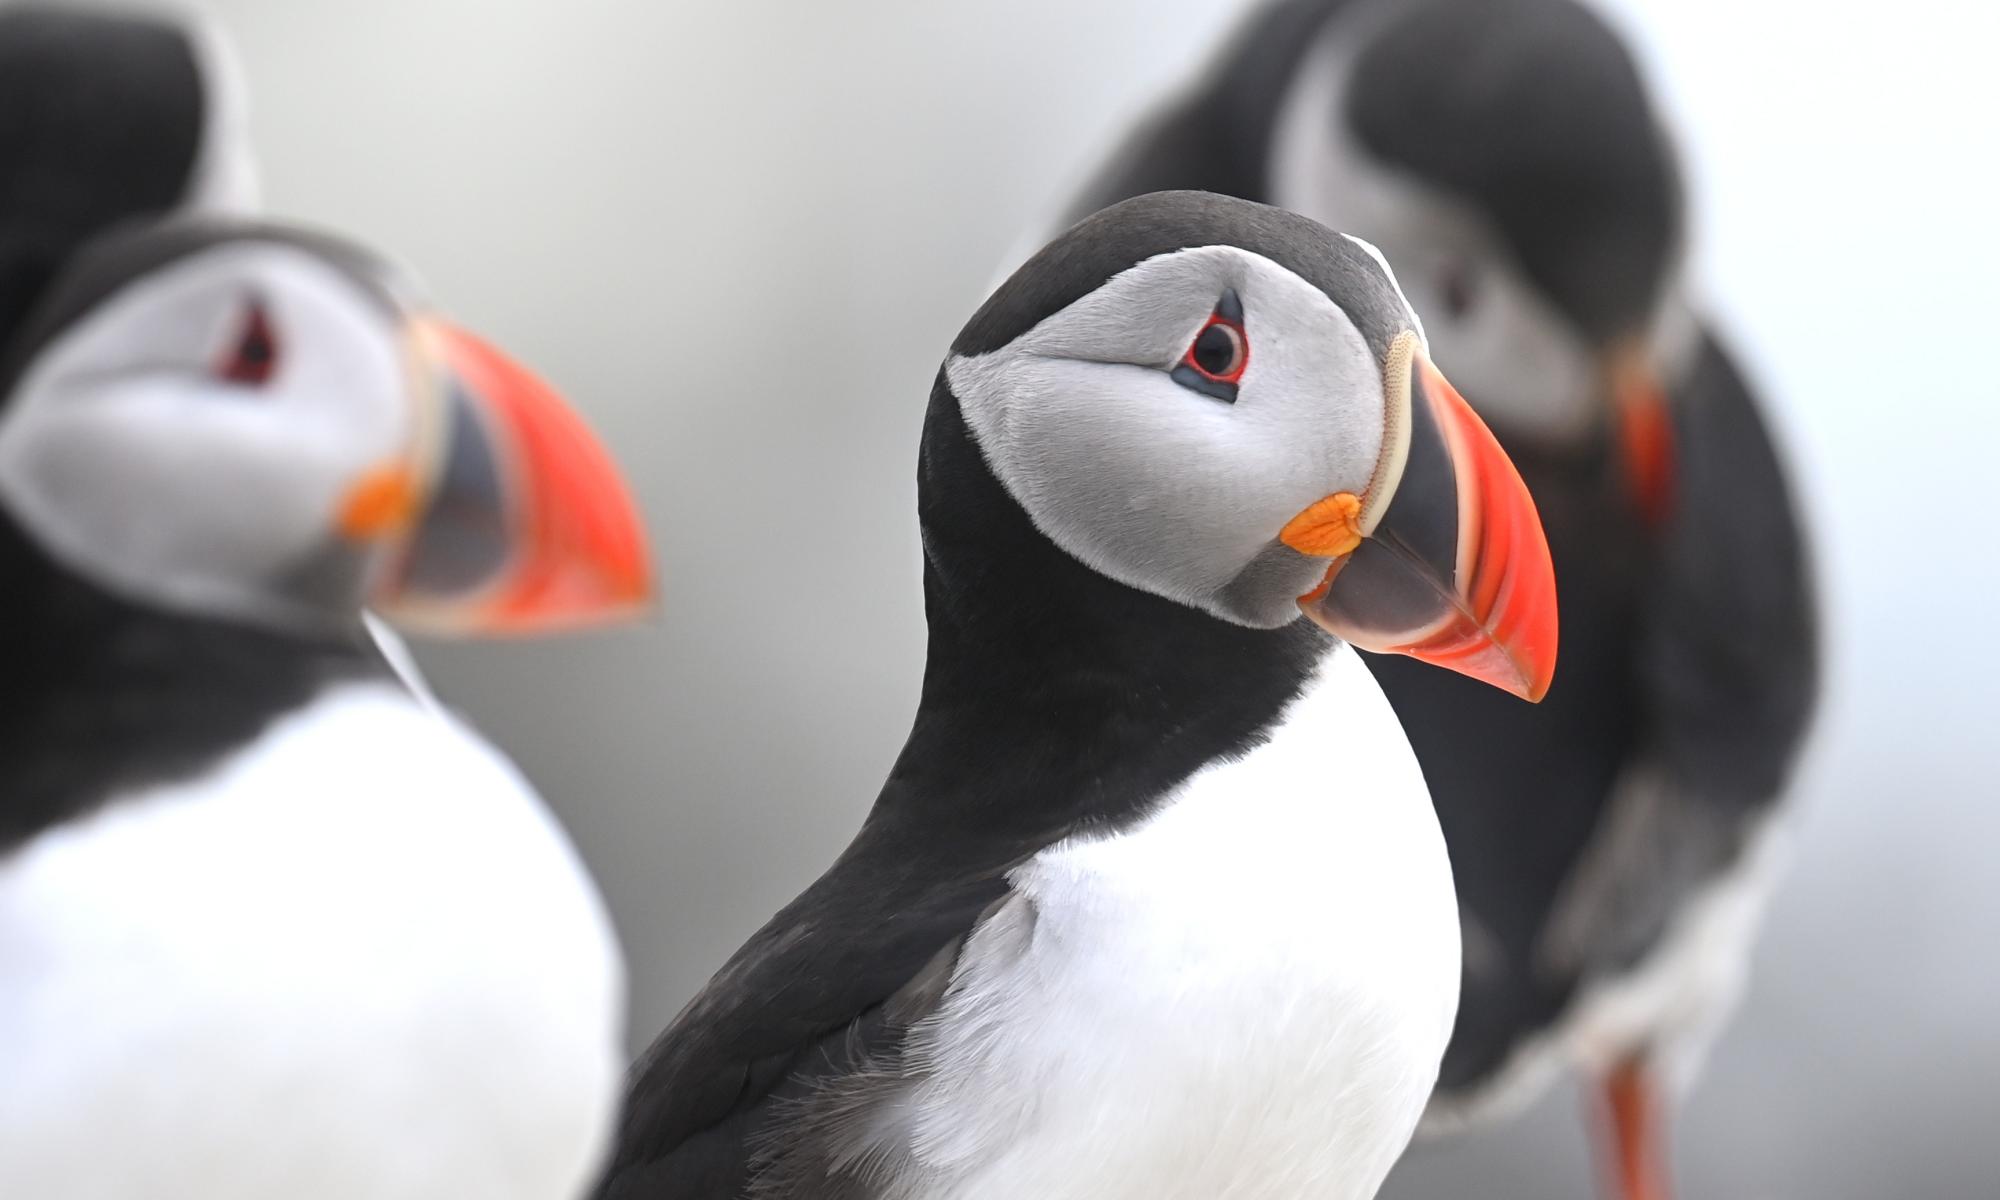 Puffin nesting sites in western Europe could be lost by end of century